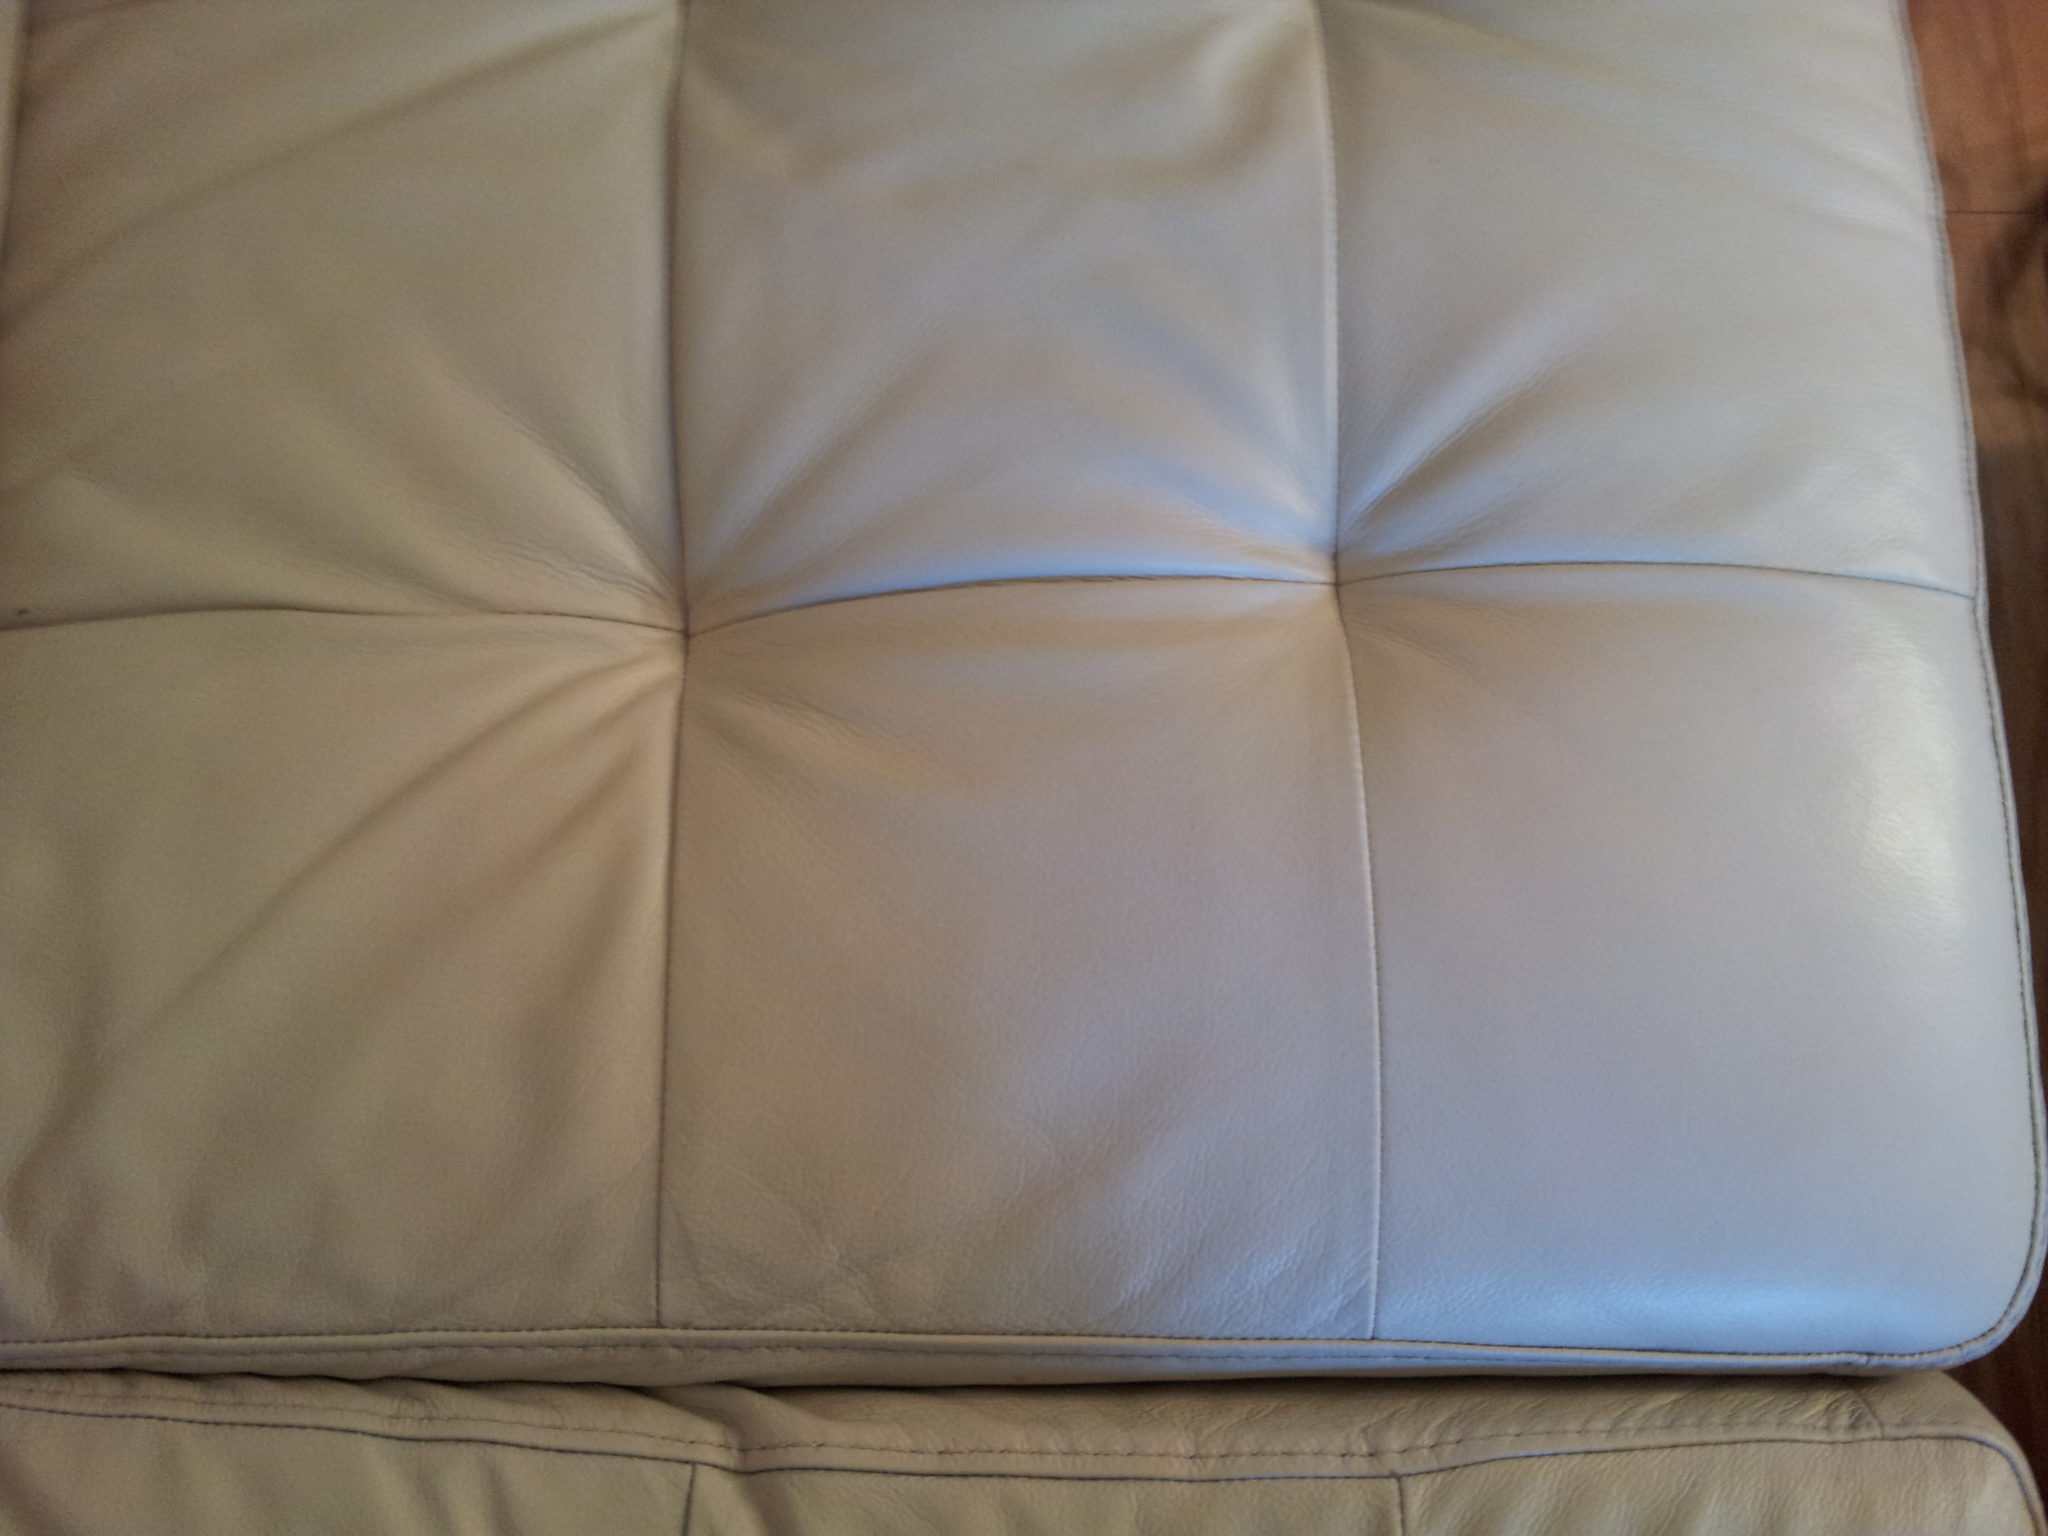 Tampa Furniture Cleaner For Fine, Leather Repair Tampa